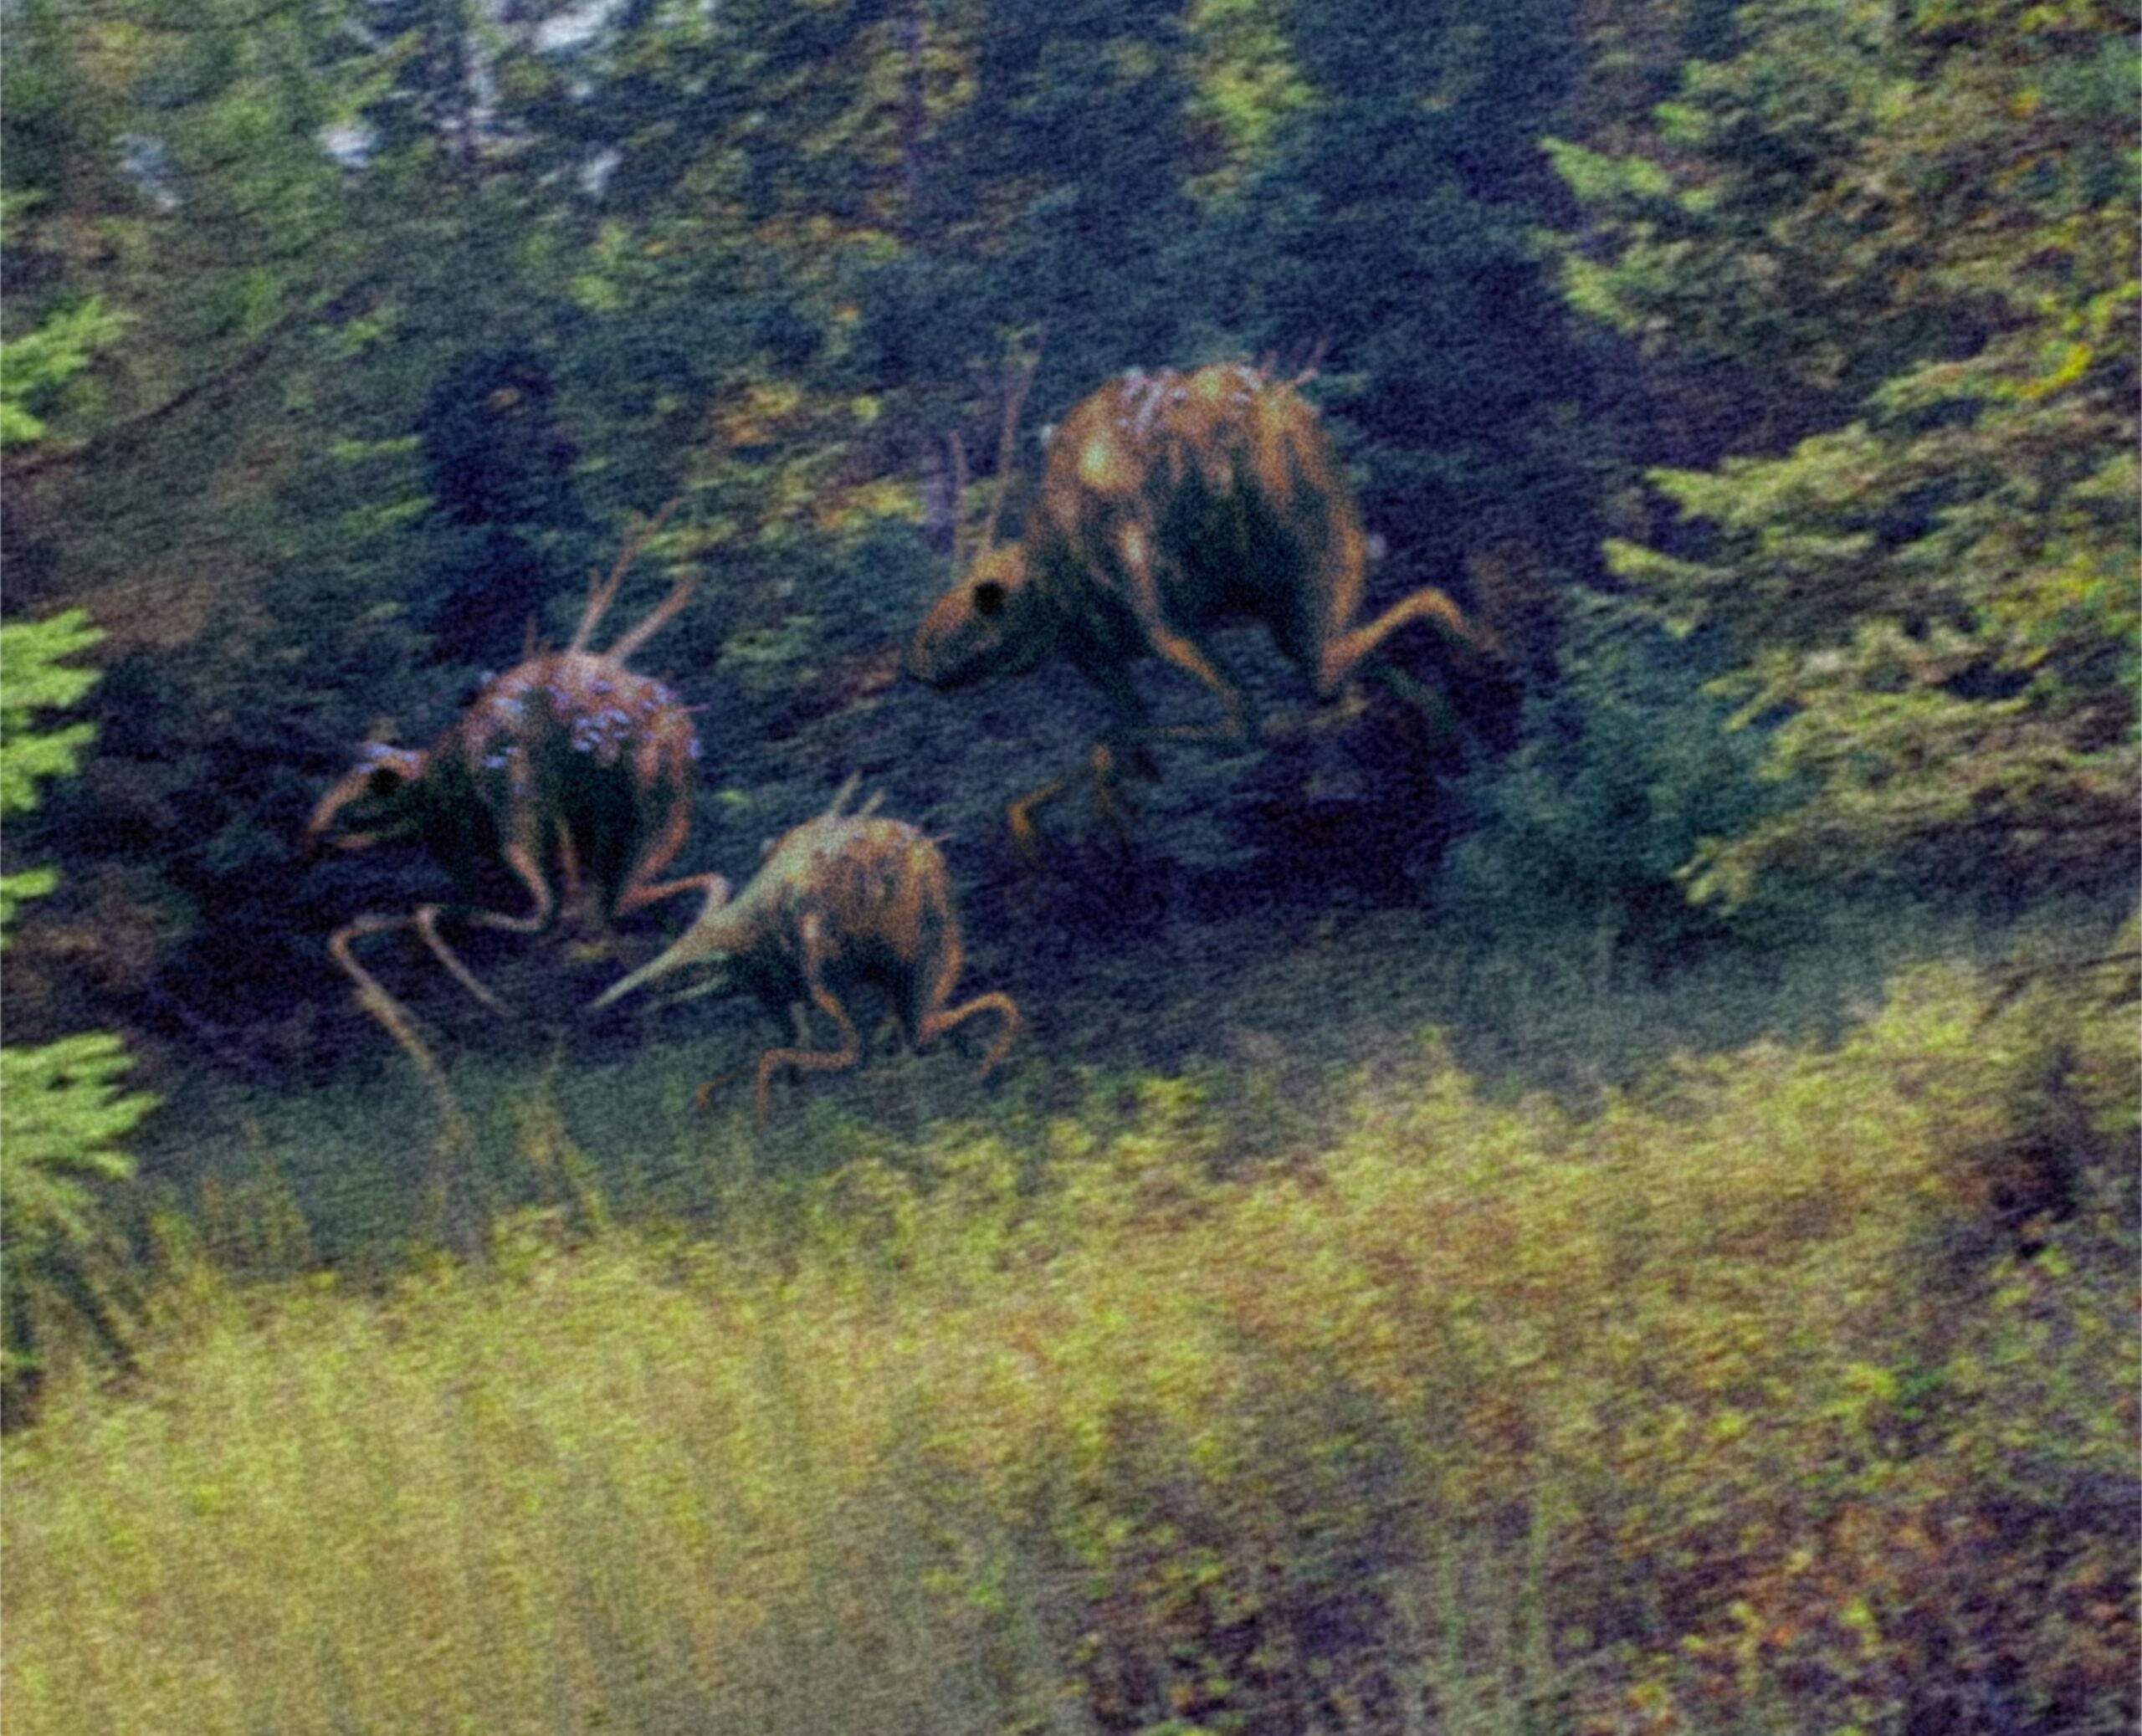 What seems to be a grainy photo of a trio of mutated animals running through a forest. They seem to be unholy hybrids of deer, rats, and I don't know, ancient incomprehensible gods?